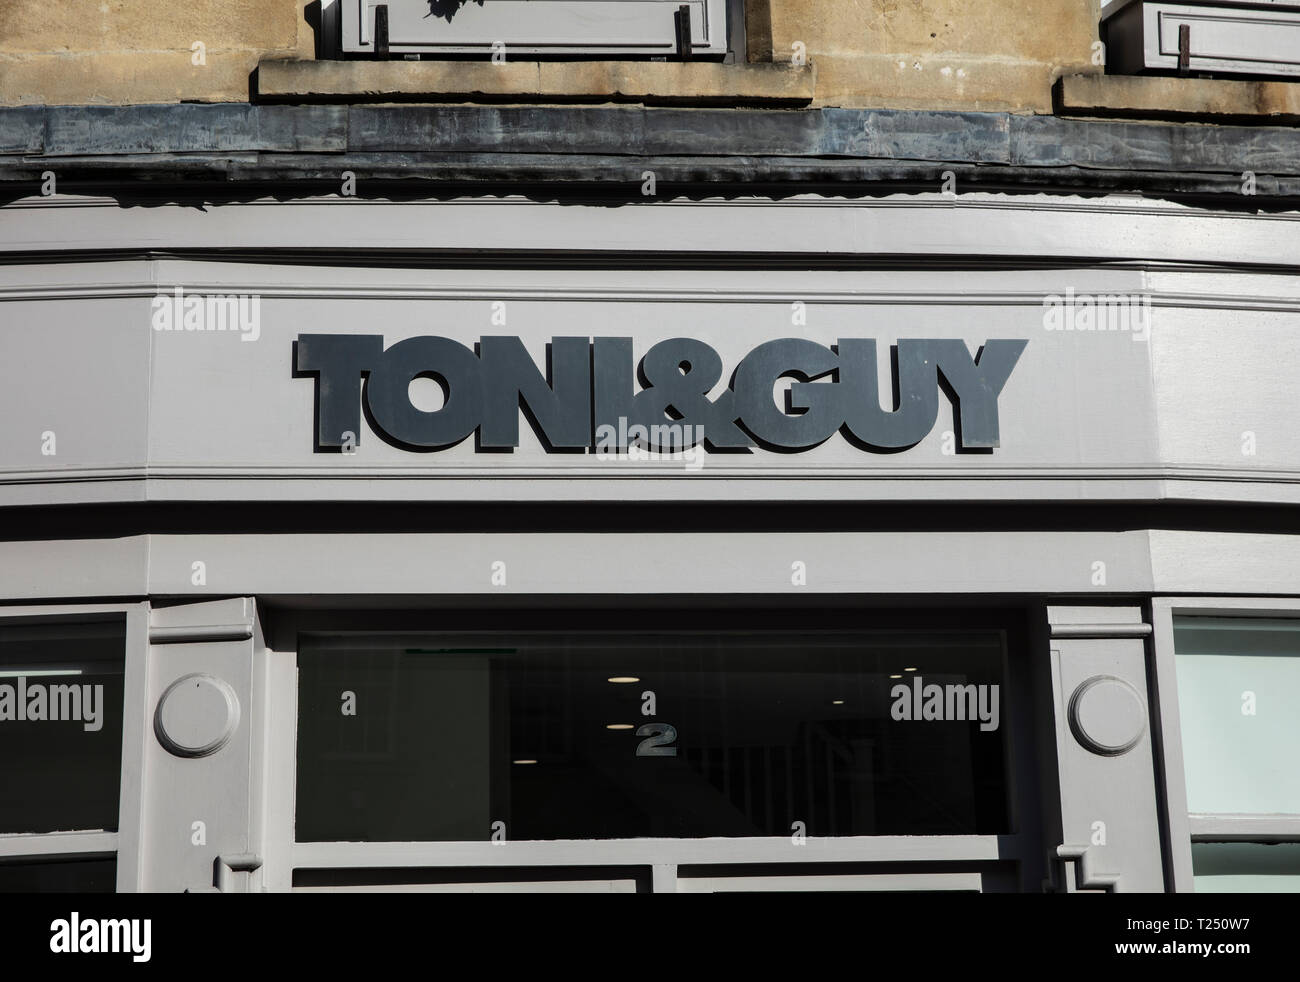 Bath, Somerset, UK, 22nd February 2019, Shop Sign for Toni and Guys Hairdressers Stock Photo